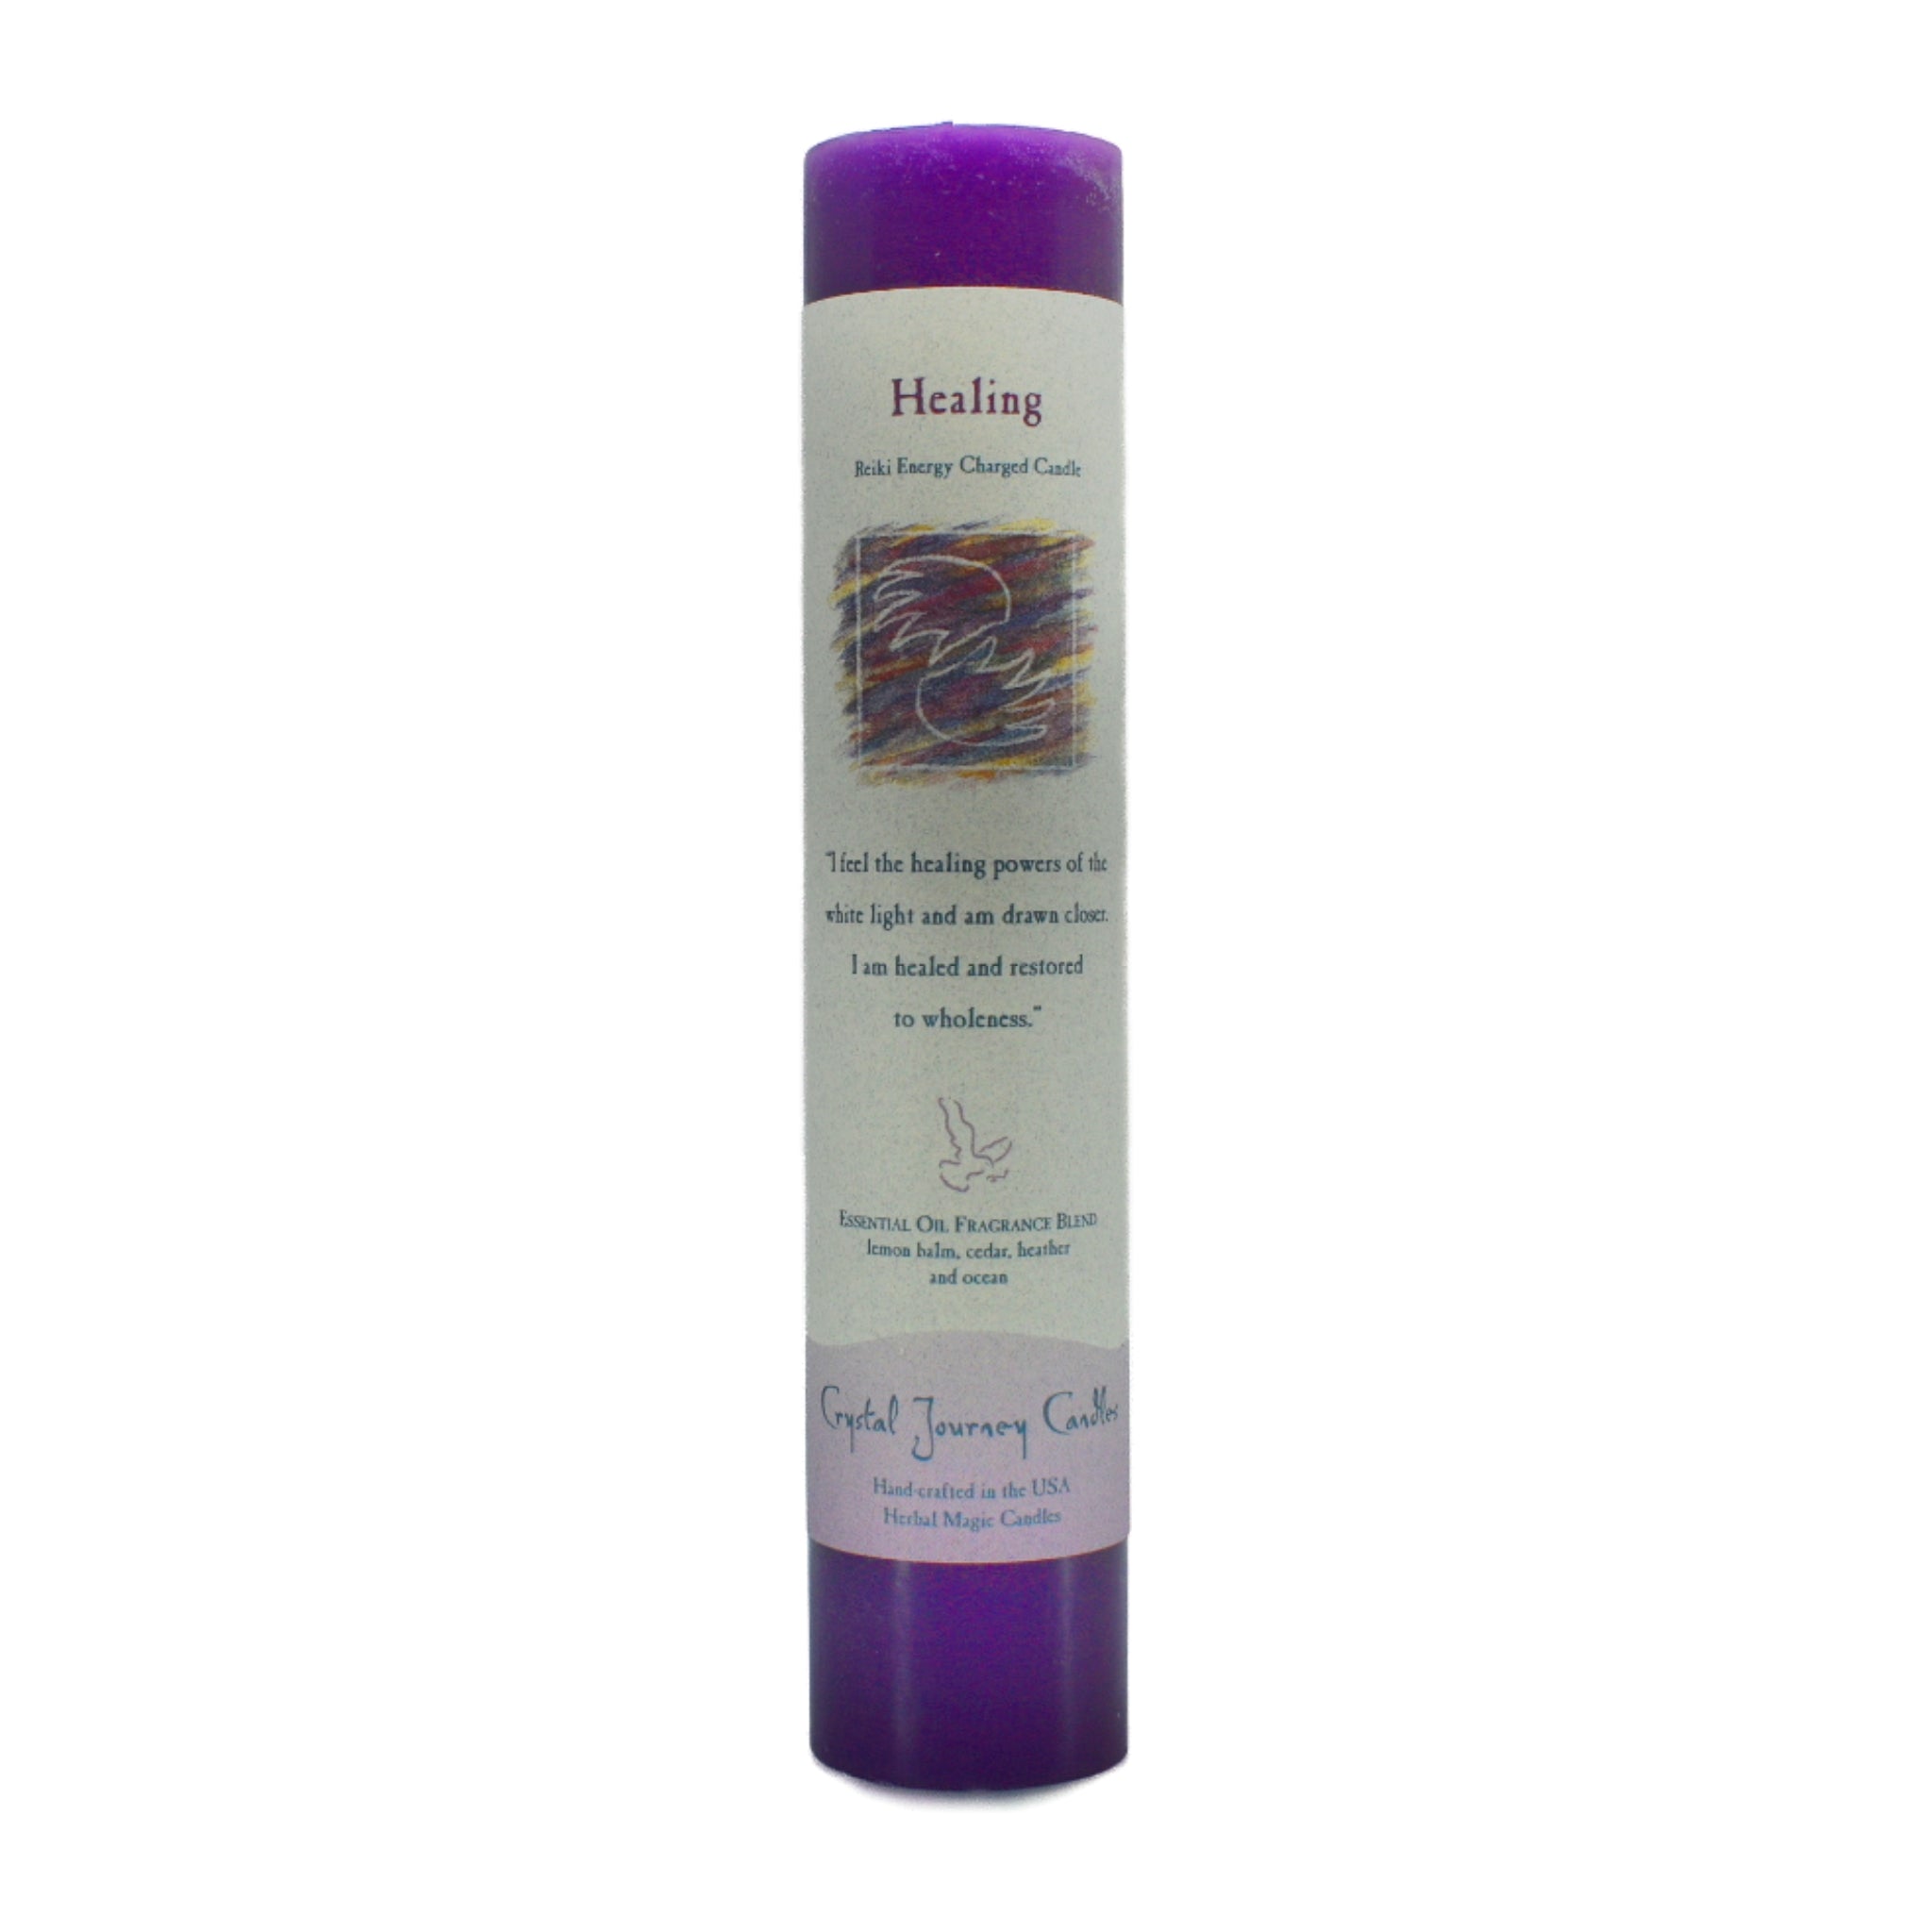 Healing Pillar Candle.  Use this candle to heal the mind, body and soul.  Scented with cedar, ocean, lemon balm and heather.